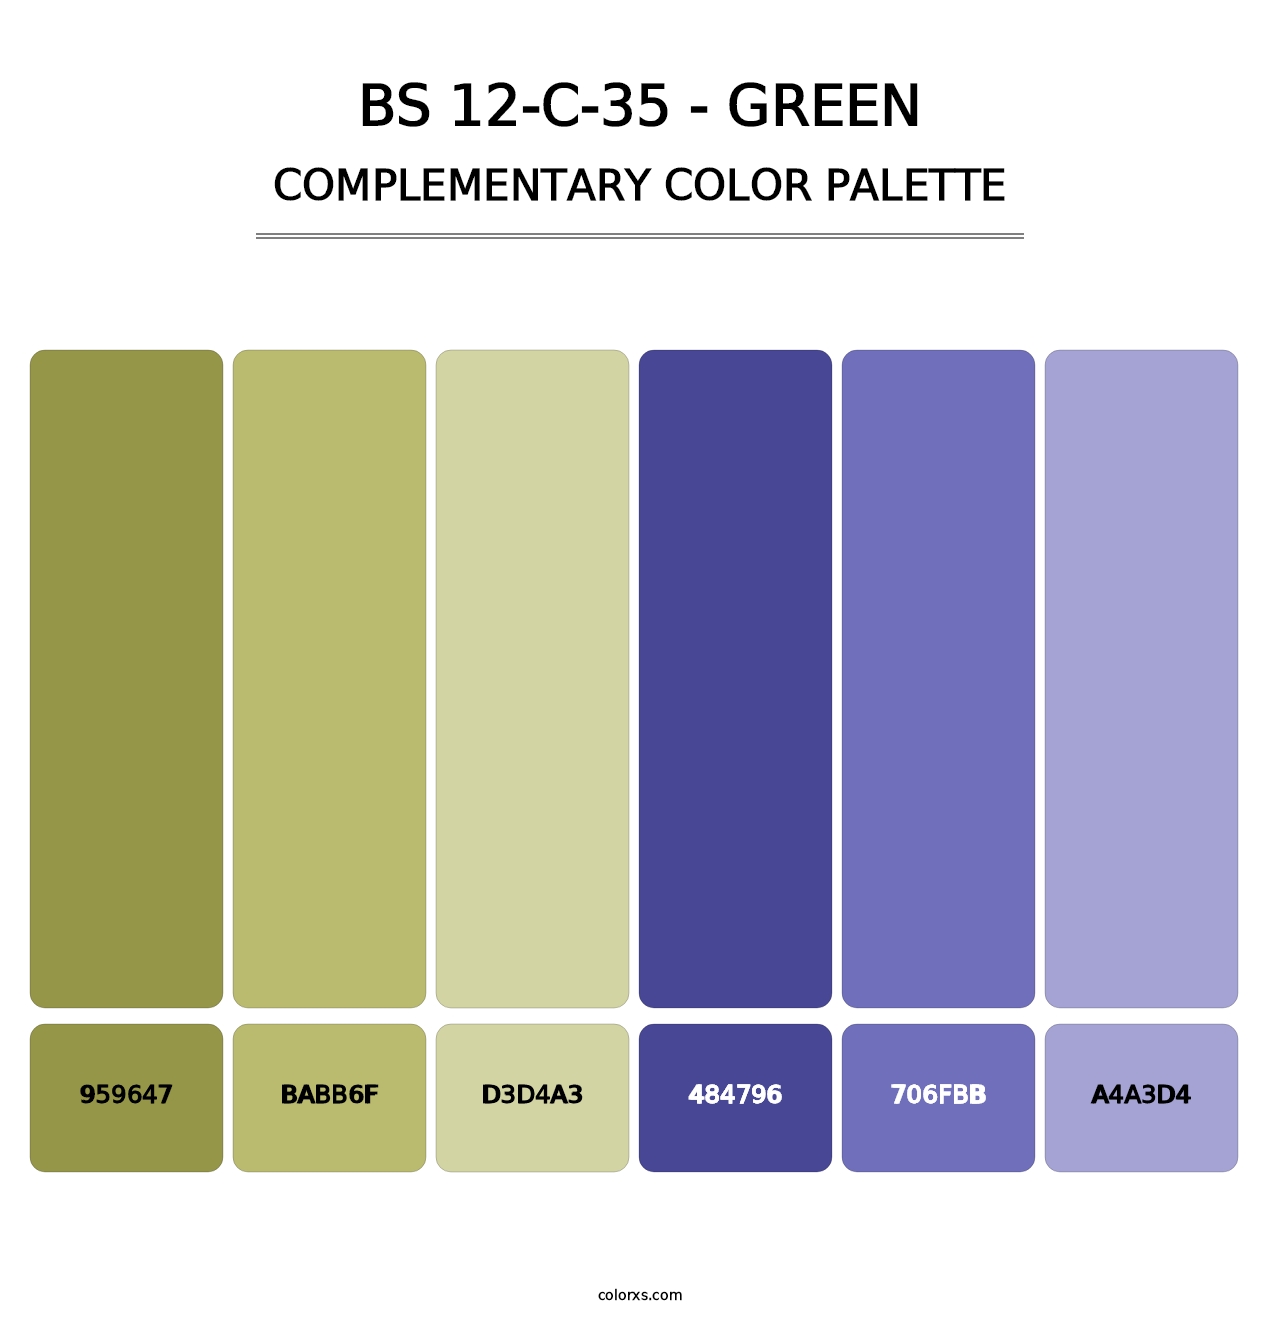 BS 12-C-35 - Green - Complementary Color Palette